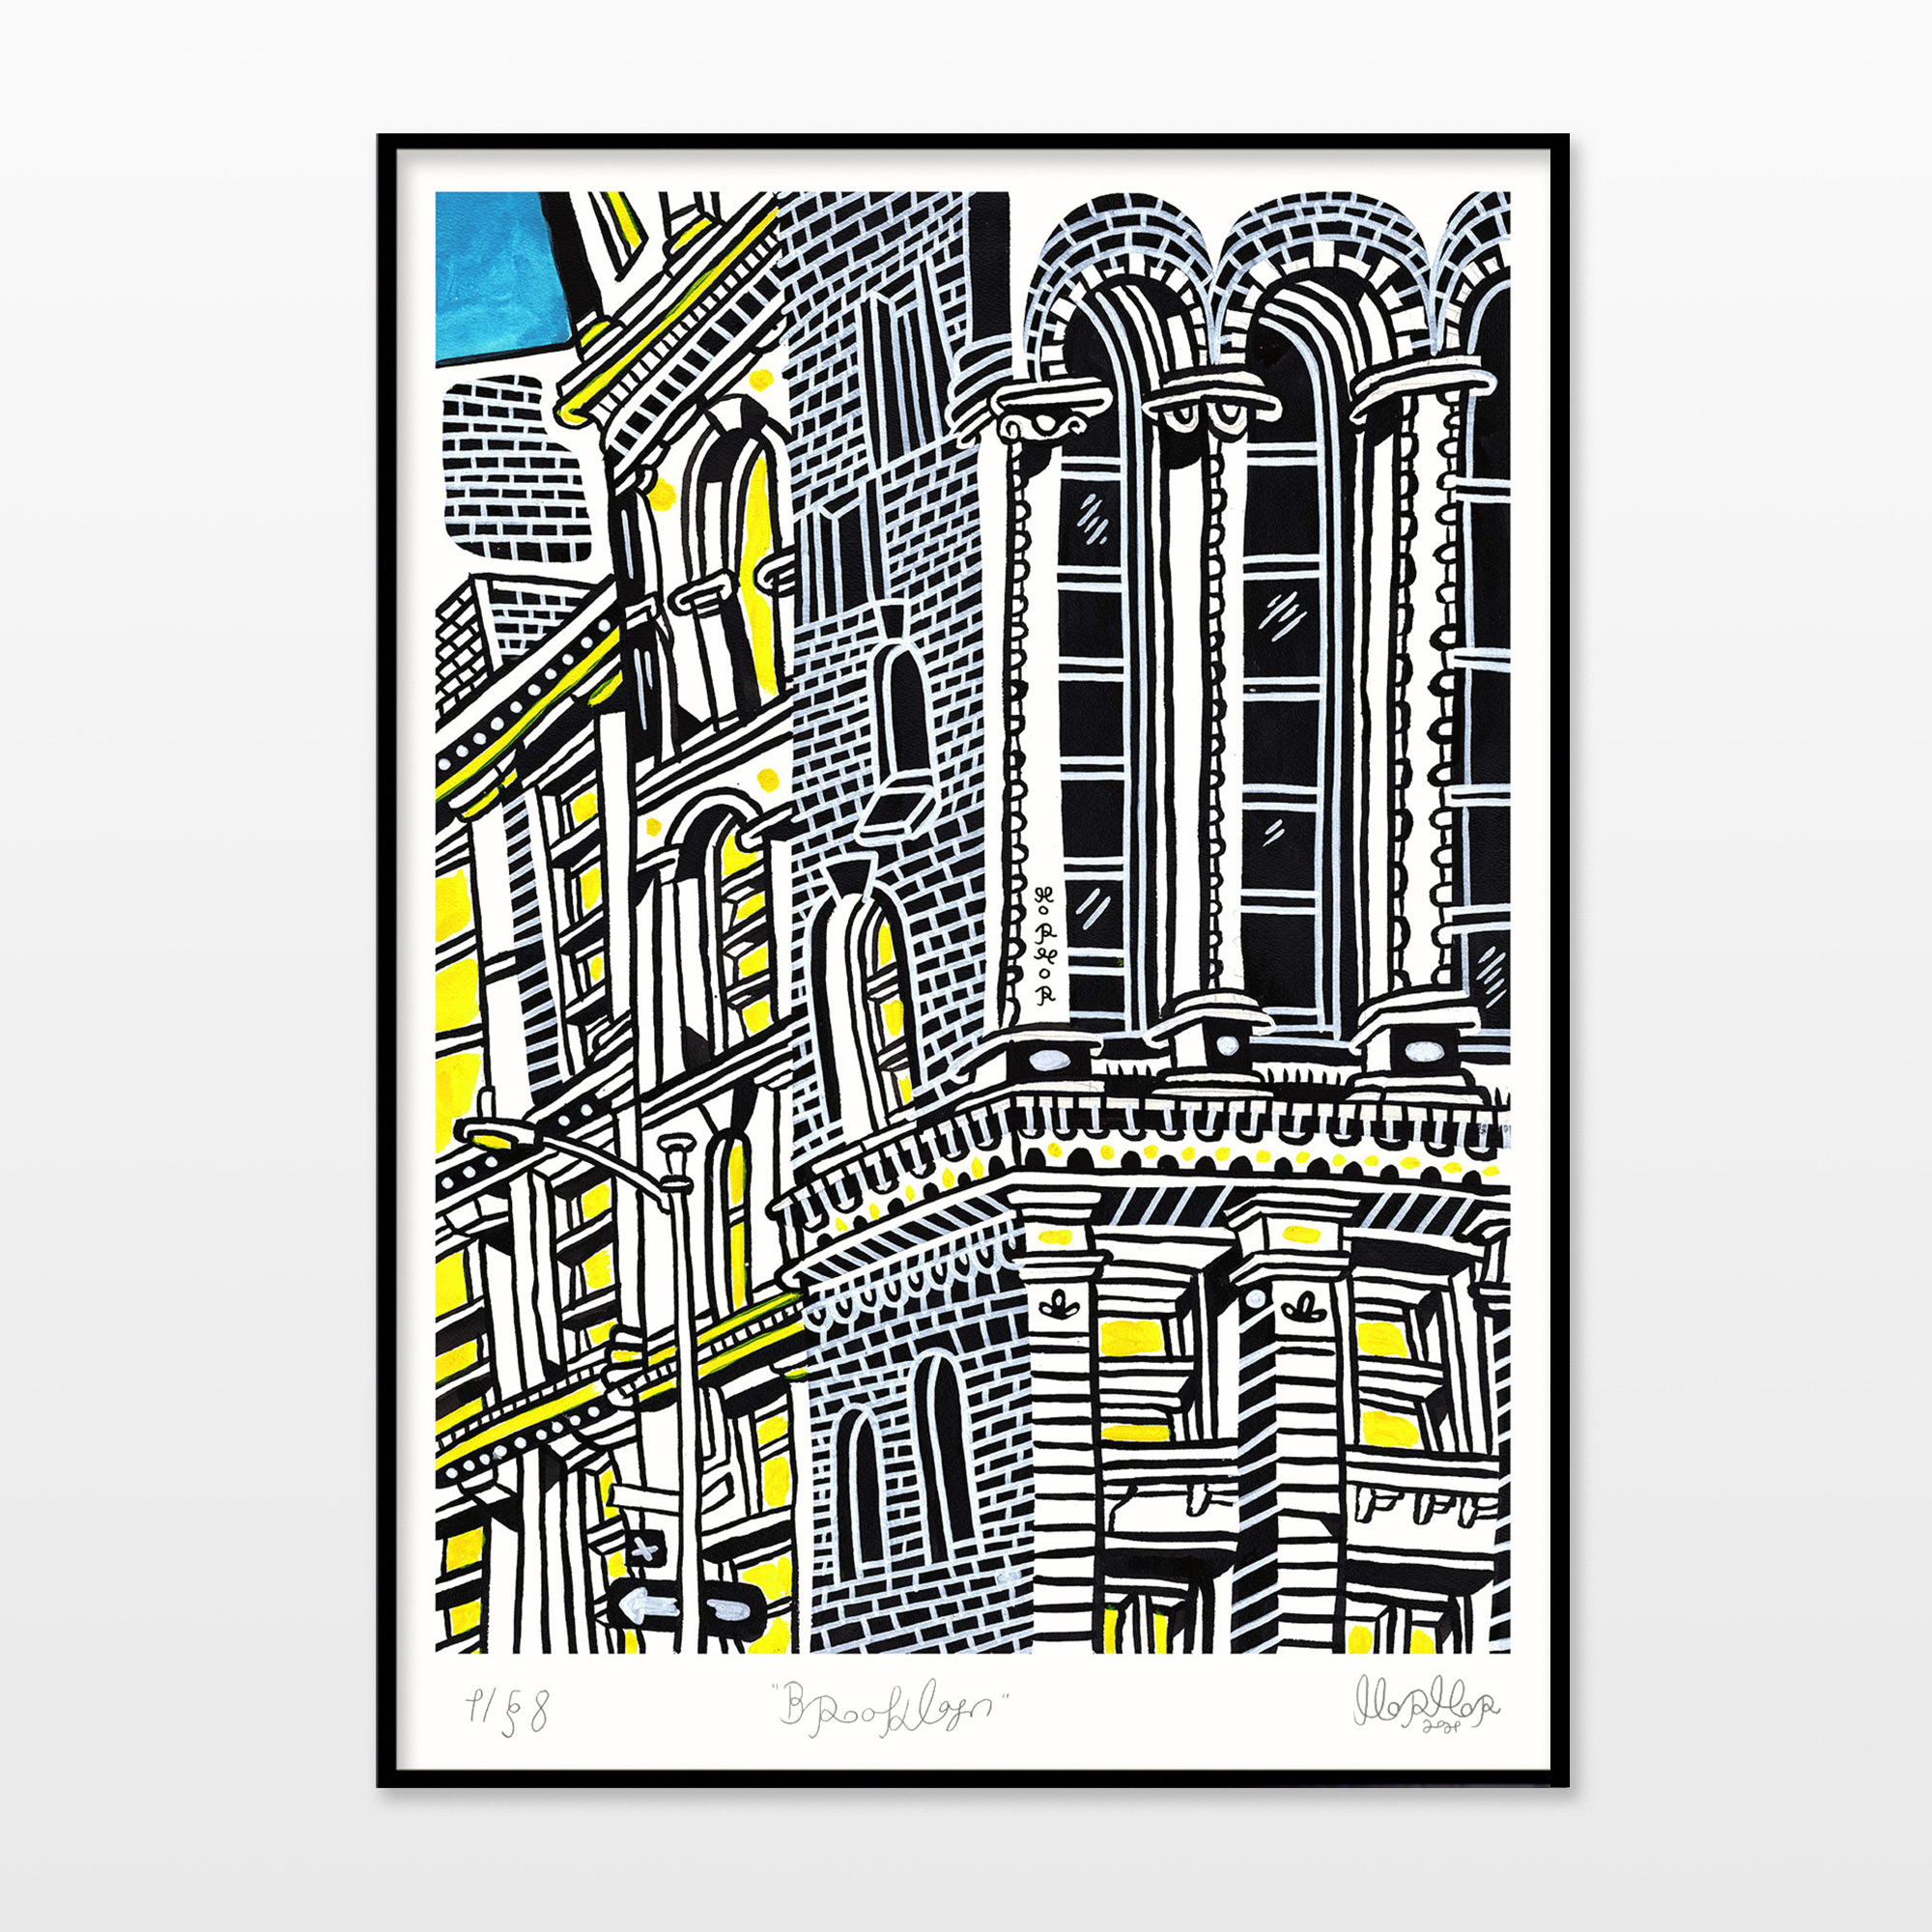 posters-prints, giclee-print, family-friendly, figurative, graphical, pop, architecture, cartoons, black, blue, yellow, ink, paper, architectural, buildings, cities, contemporary-art, copenhagen, danish, design, interior, interior-design, modern, modern-art, nordic, Buy original high quality art. Paintings, drawings, limited edition prints & posters by talented artists.